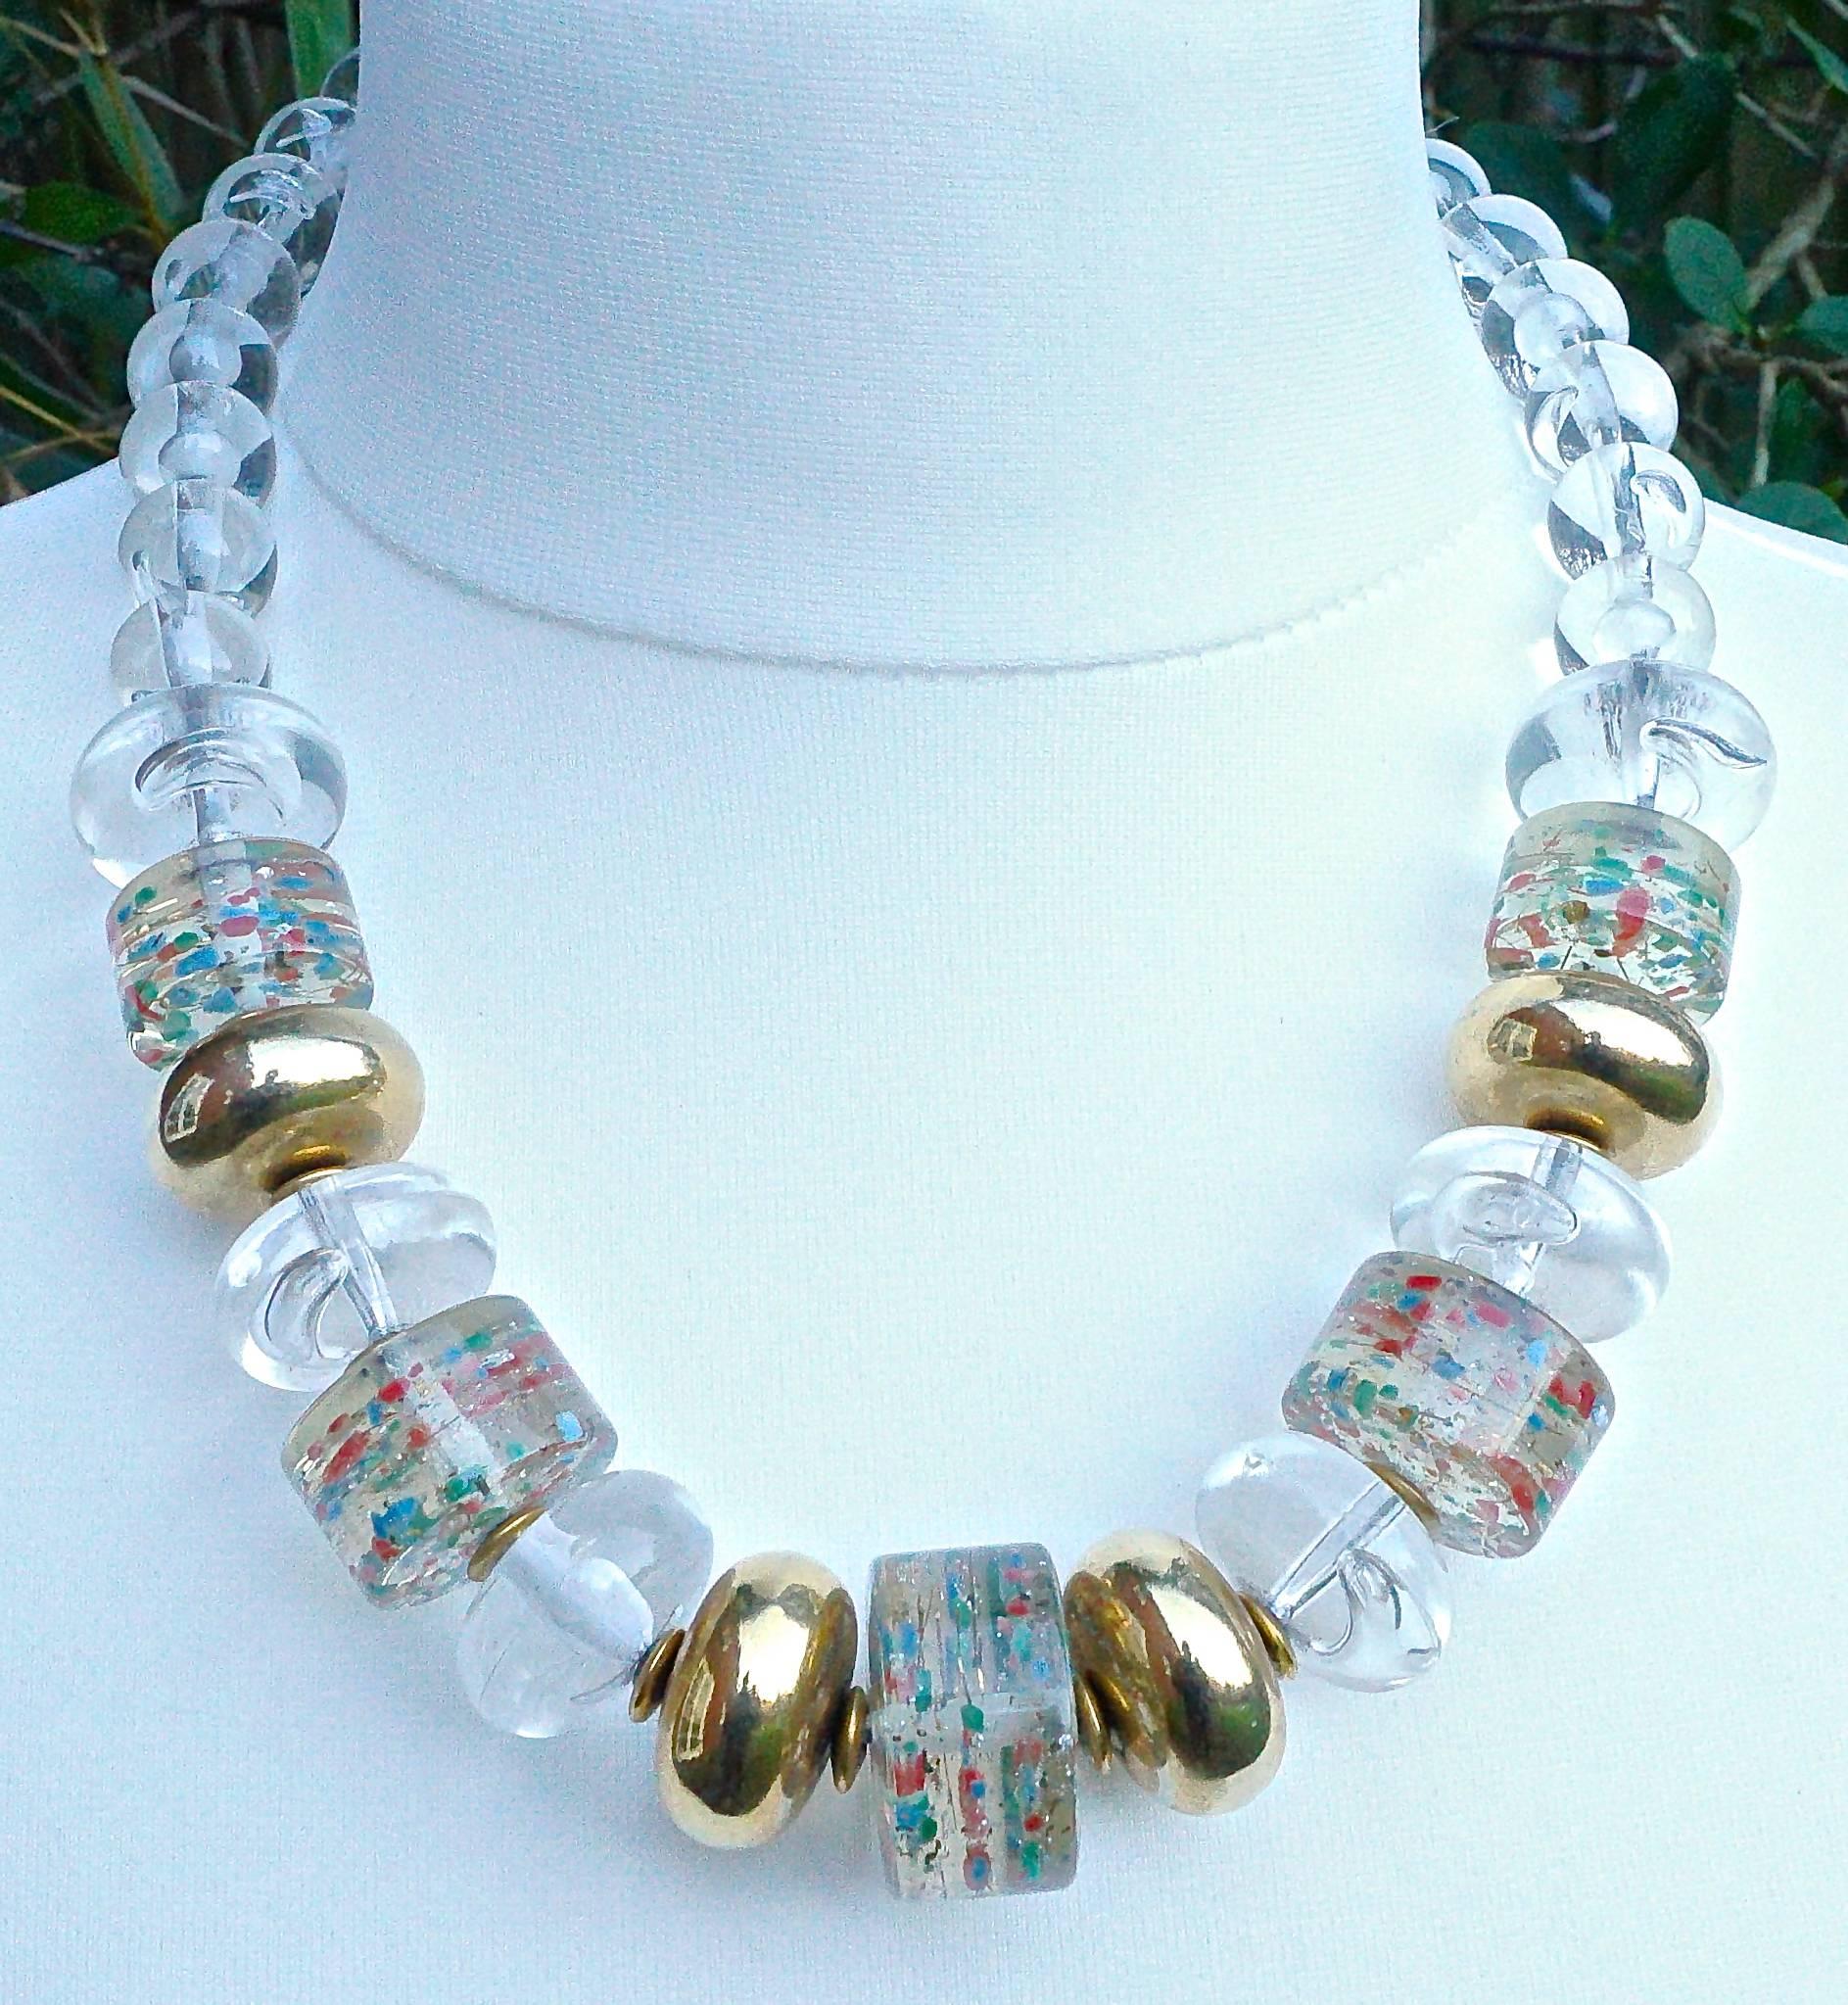 Large plastic bead necklace with clear and golden beads, and featuring five disc shaped beads with blue, green, red and silver confetti. Most of the clear beads have clear bubbles inside. There is a length of smaller round clear beads leading to the